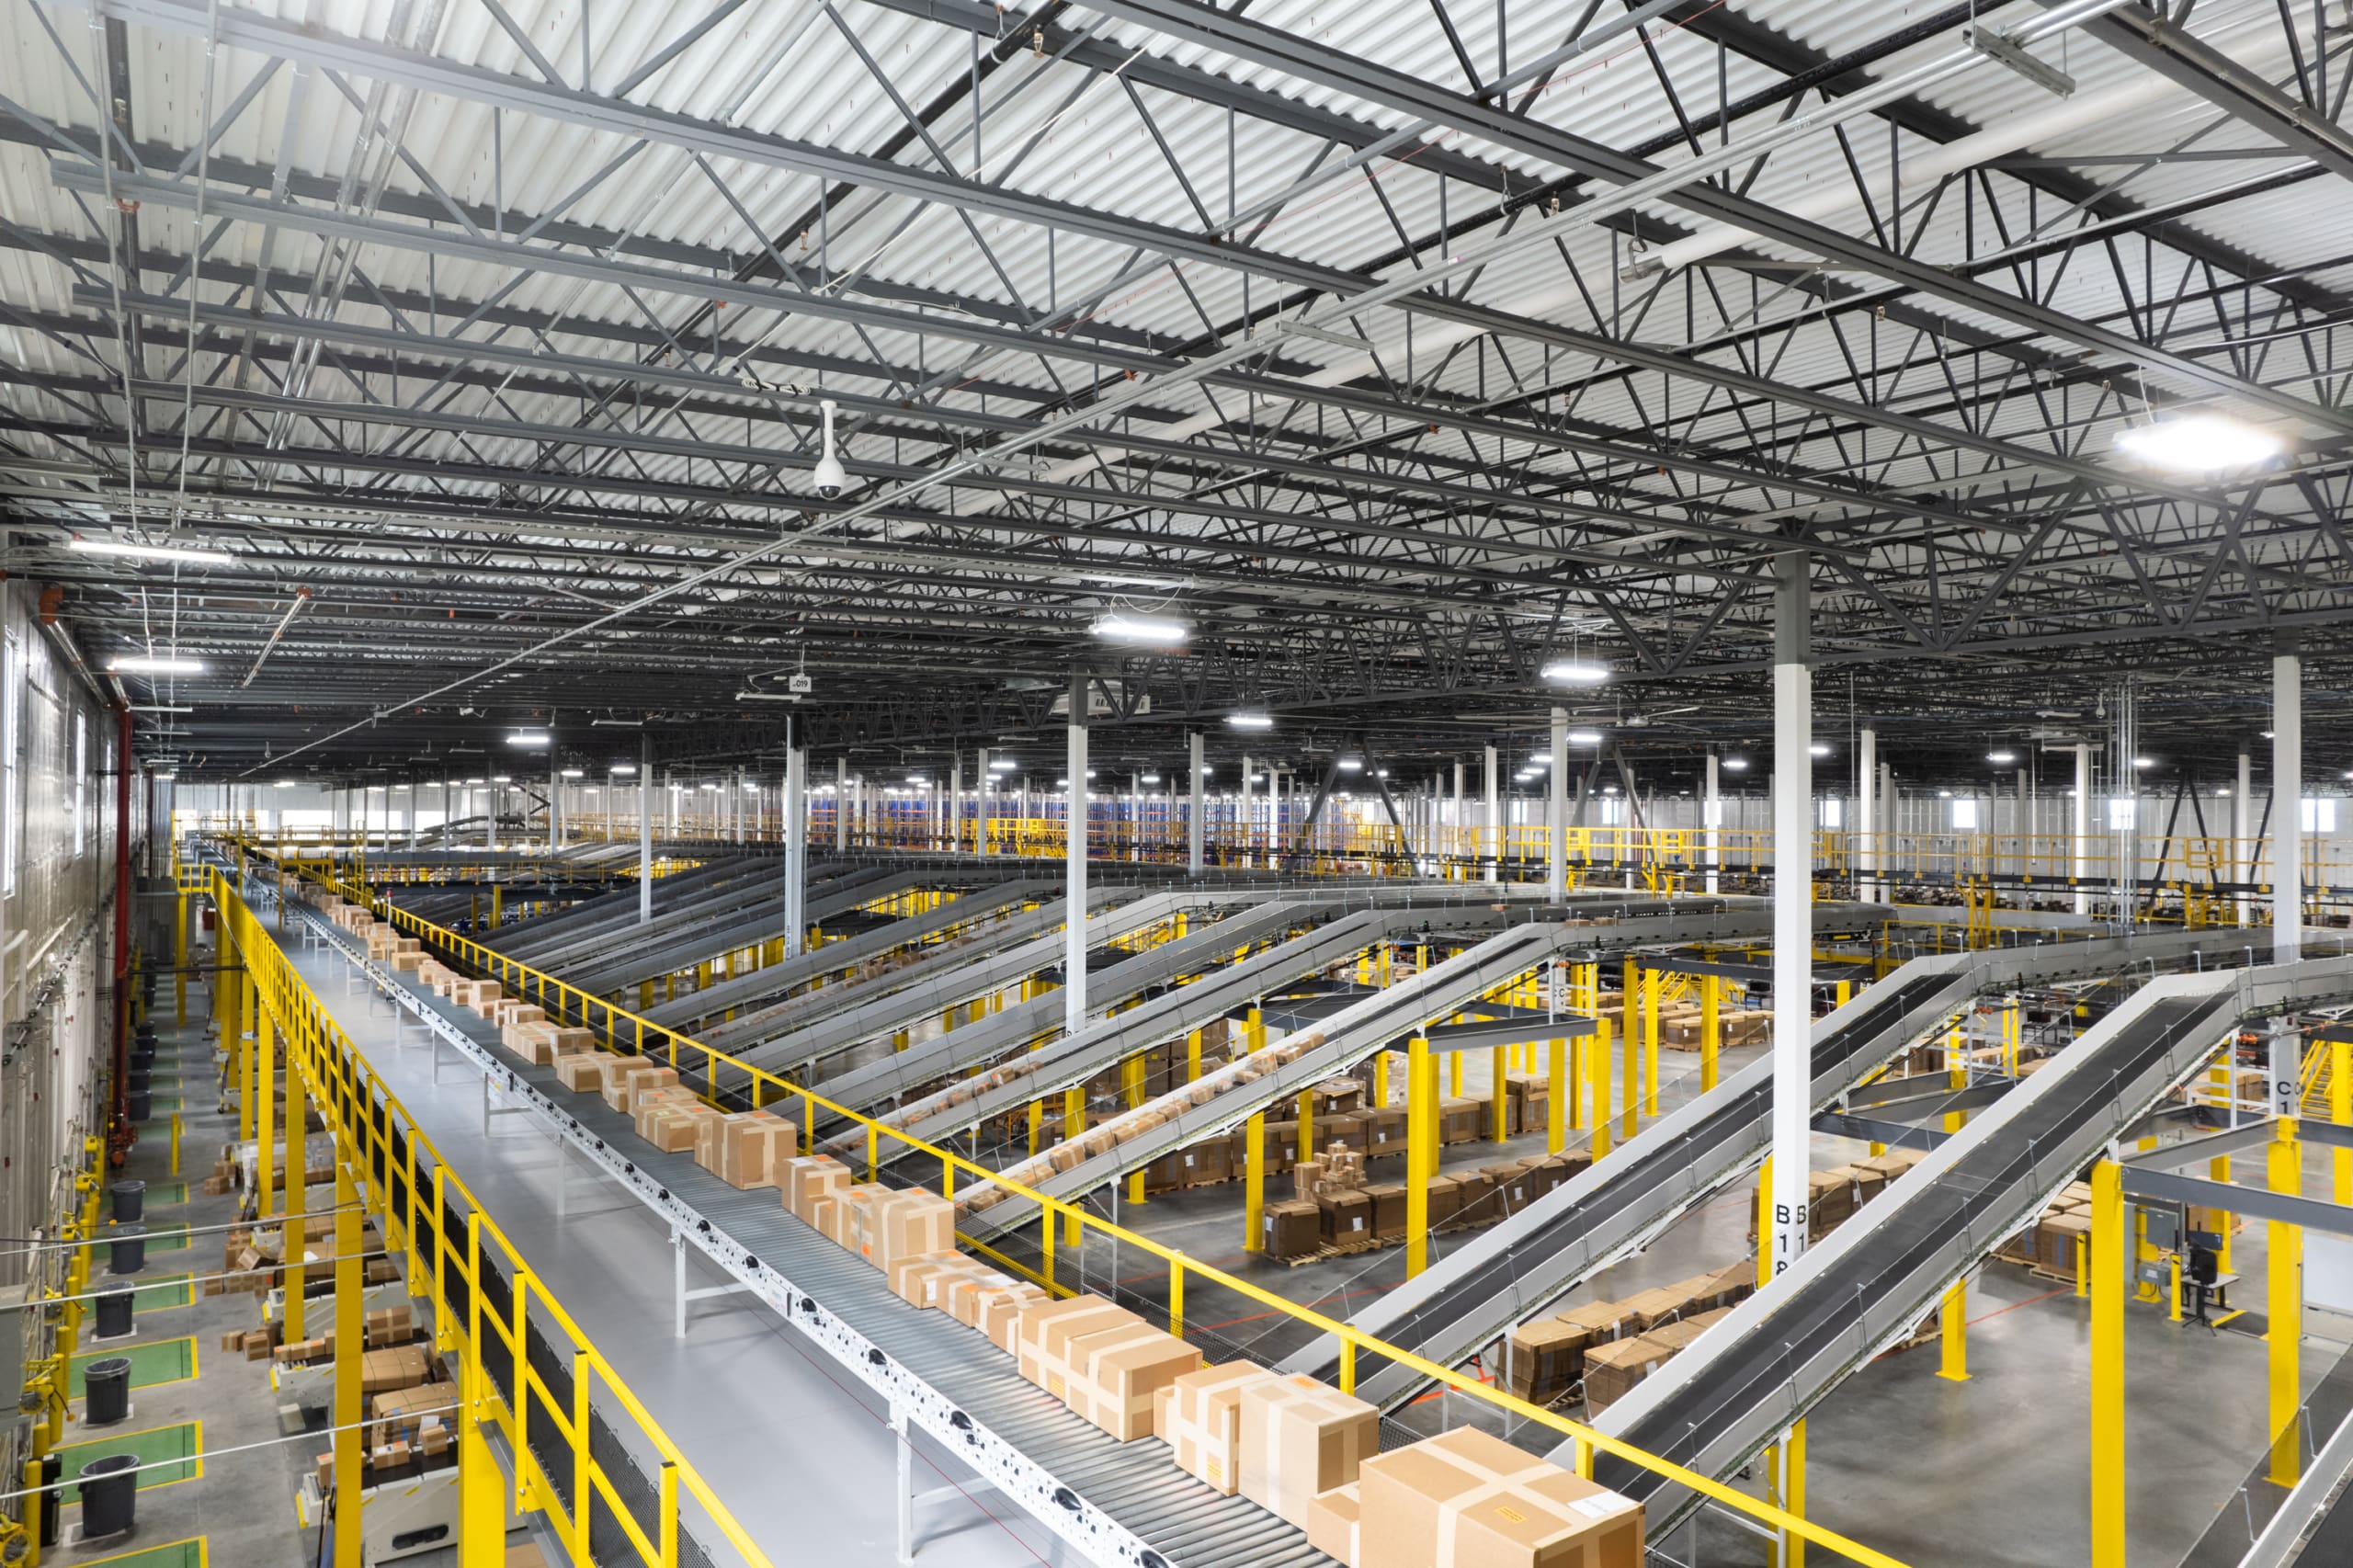 A large warehouse with numerous conveyor belts transporting boxes. The space is organized with yellow railings and high ceilings with industrial lighting.